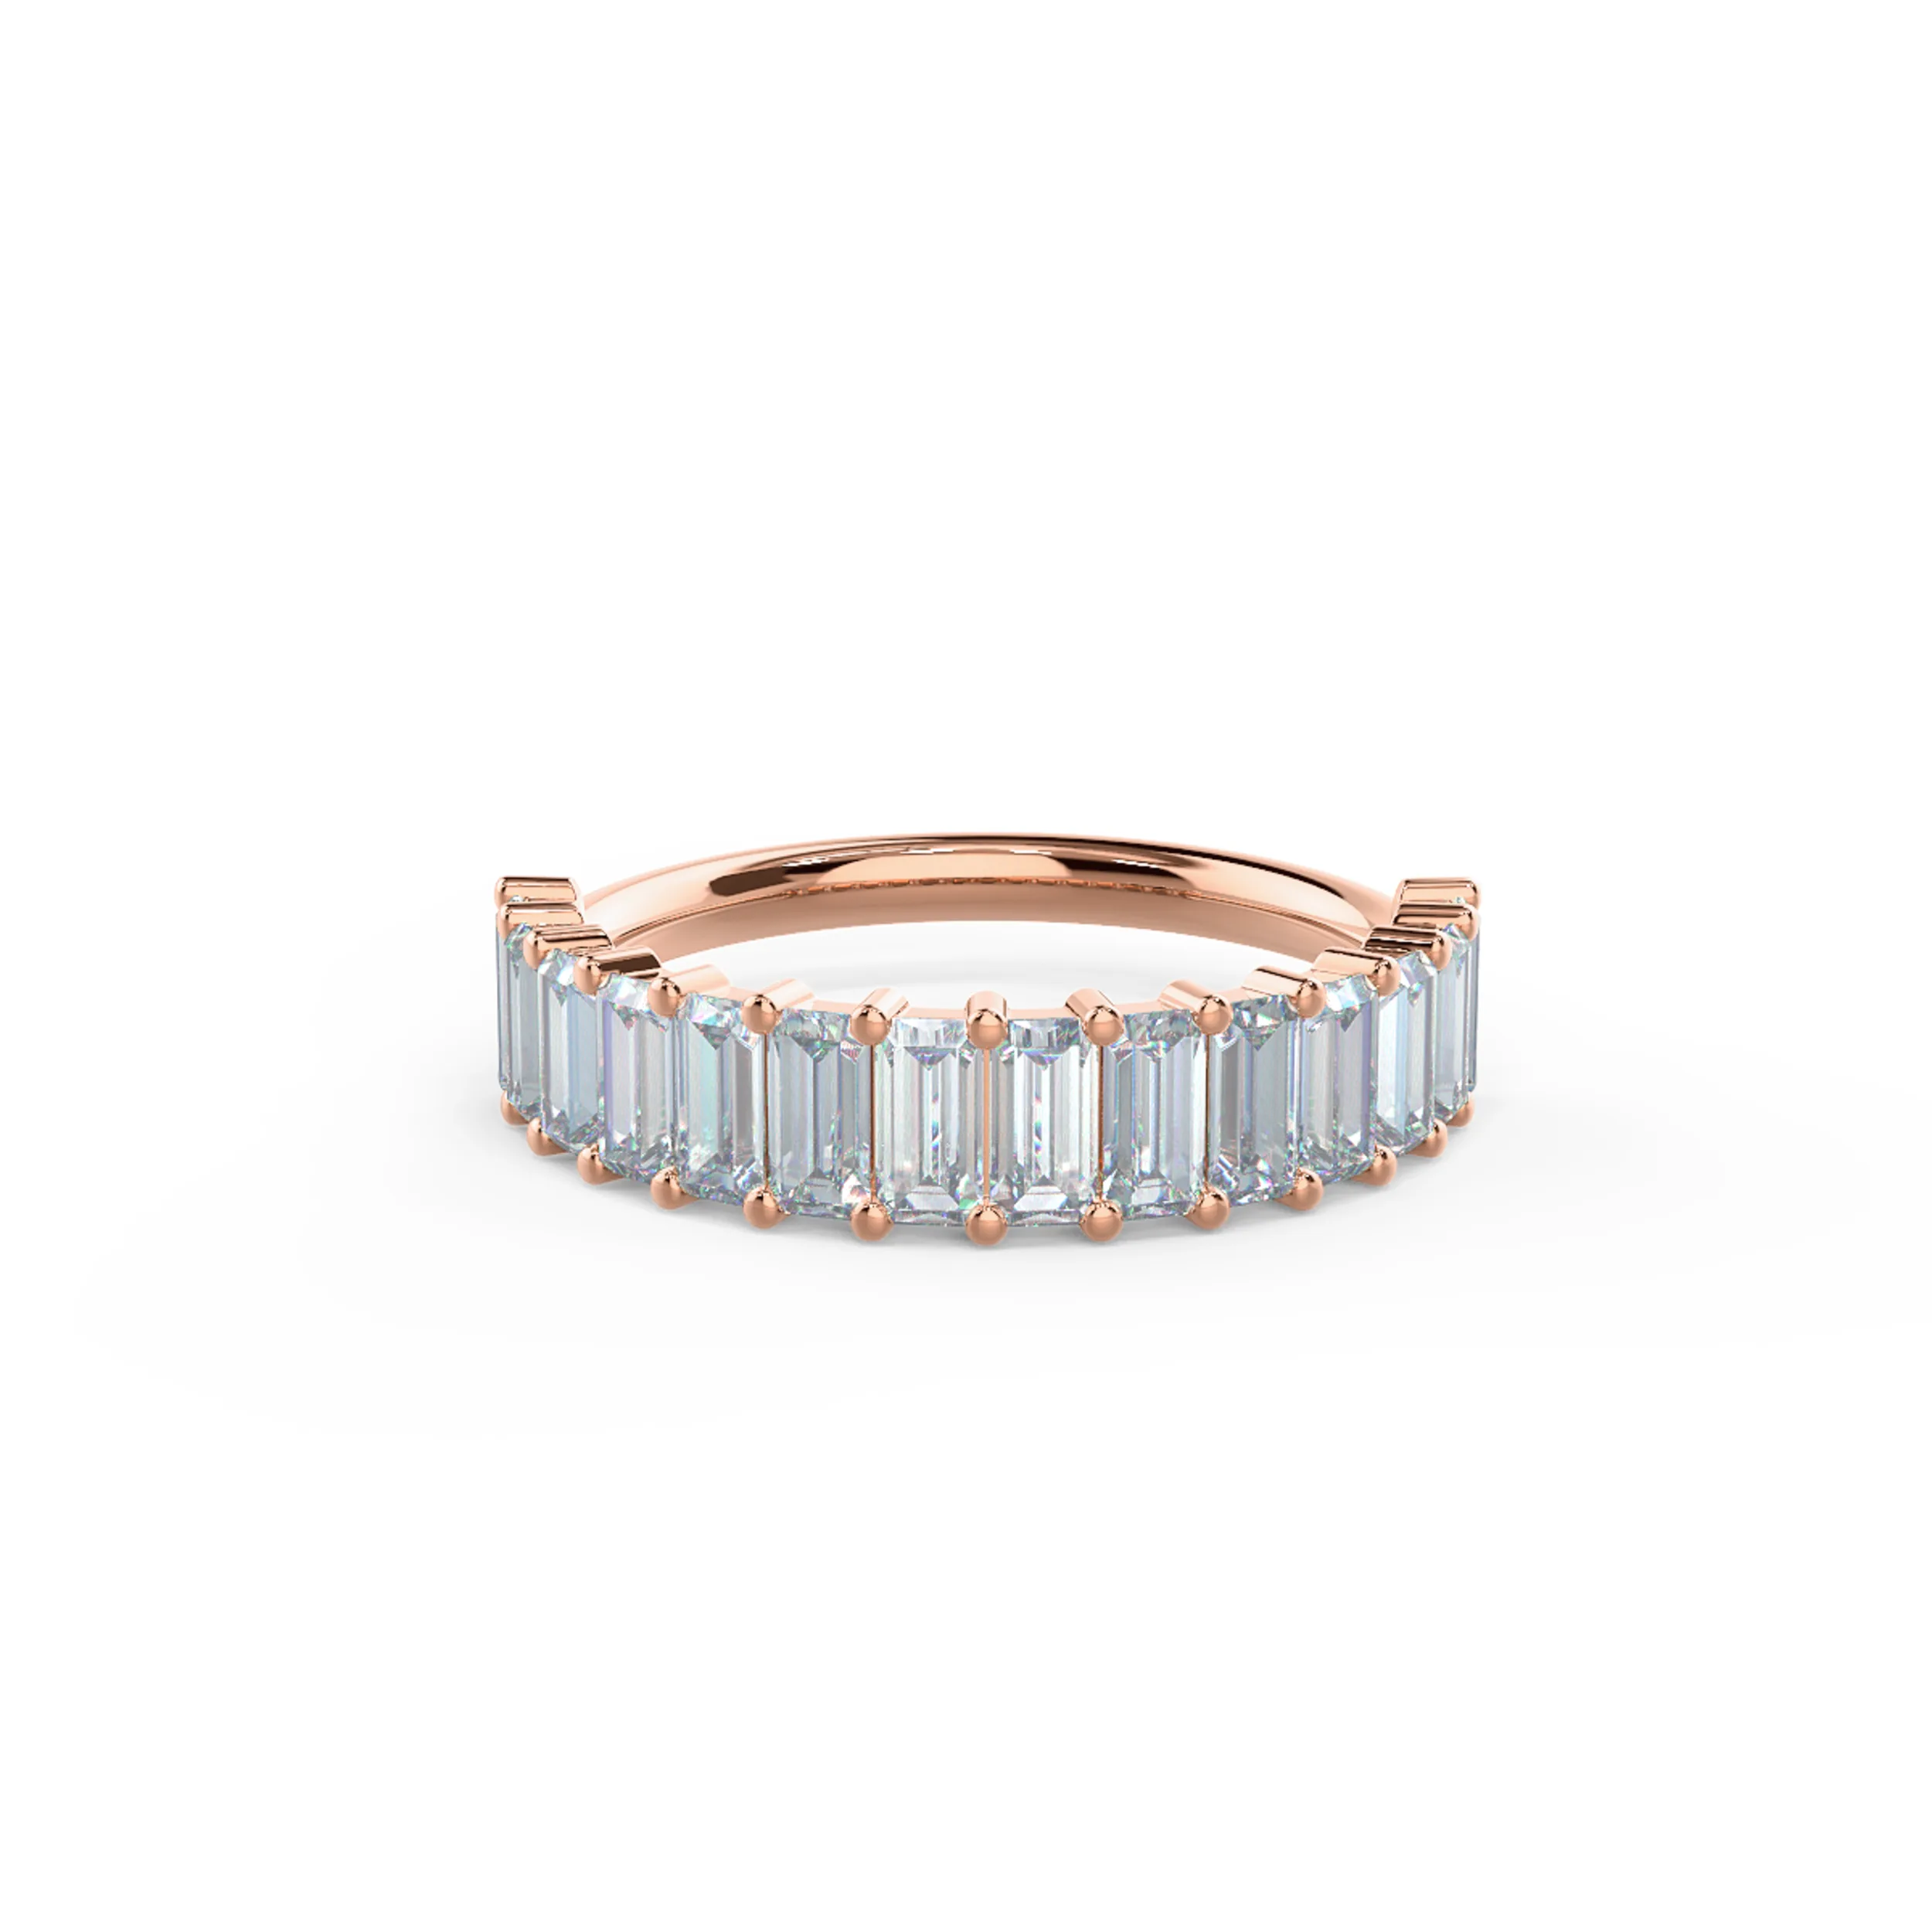 1.4 ct Lab Diamonds set in 14kt Rose Gold Baguette Half Band (Main View)